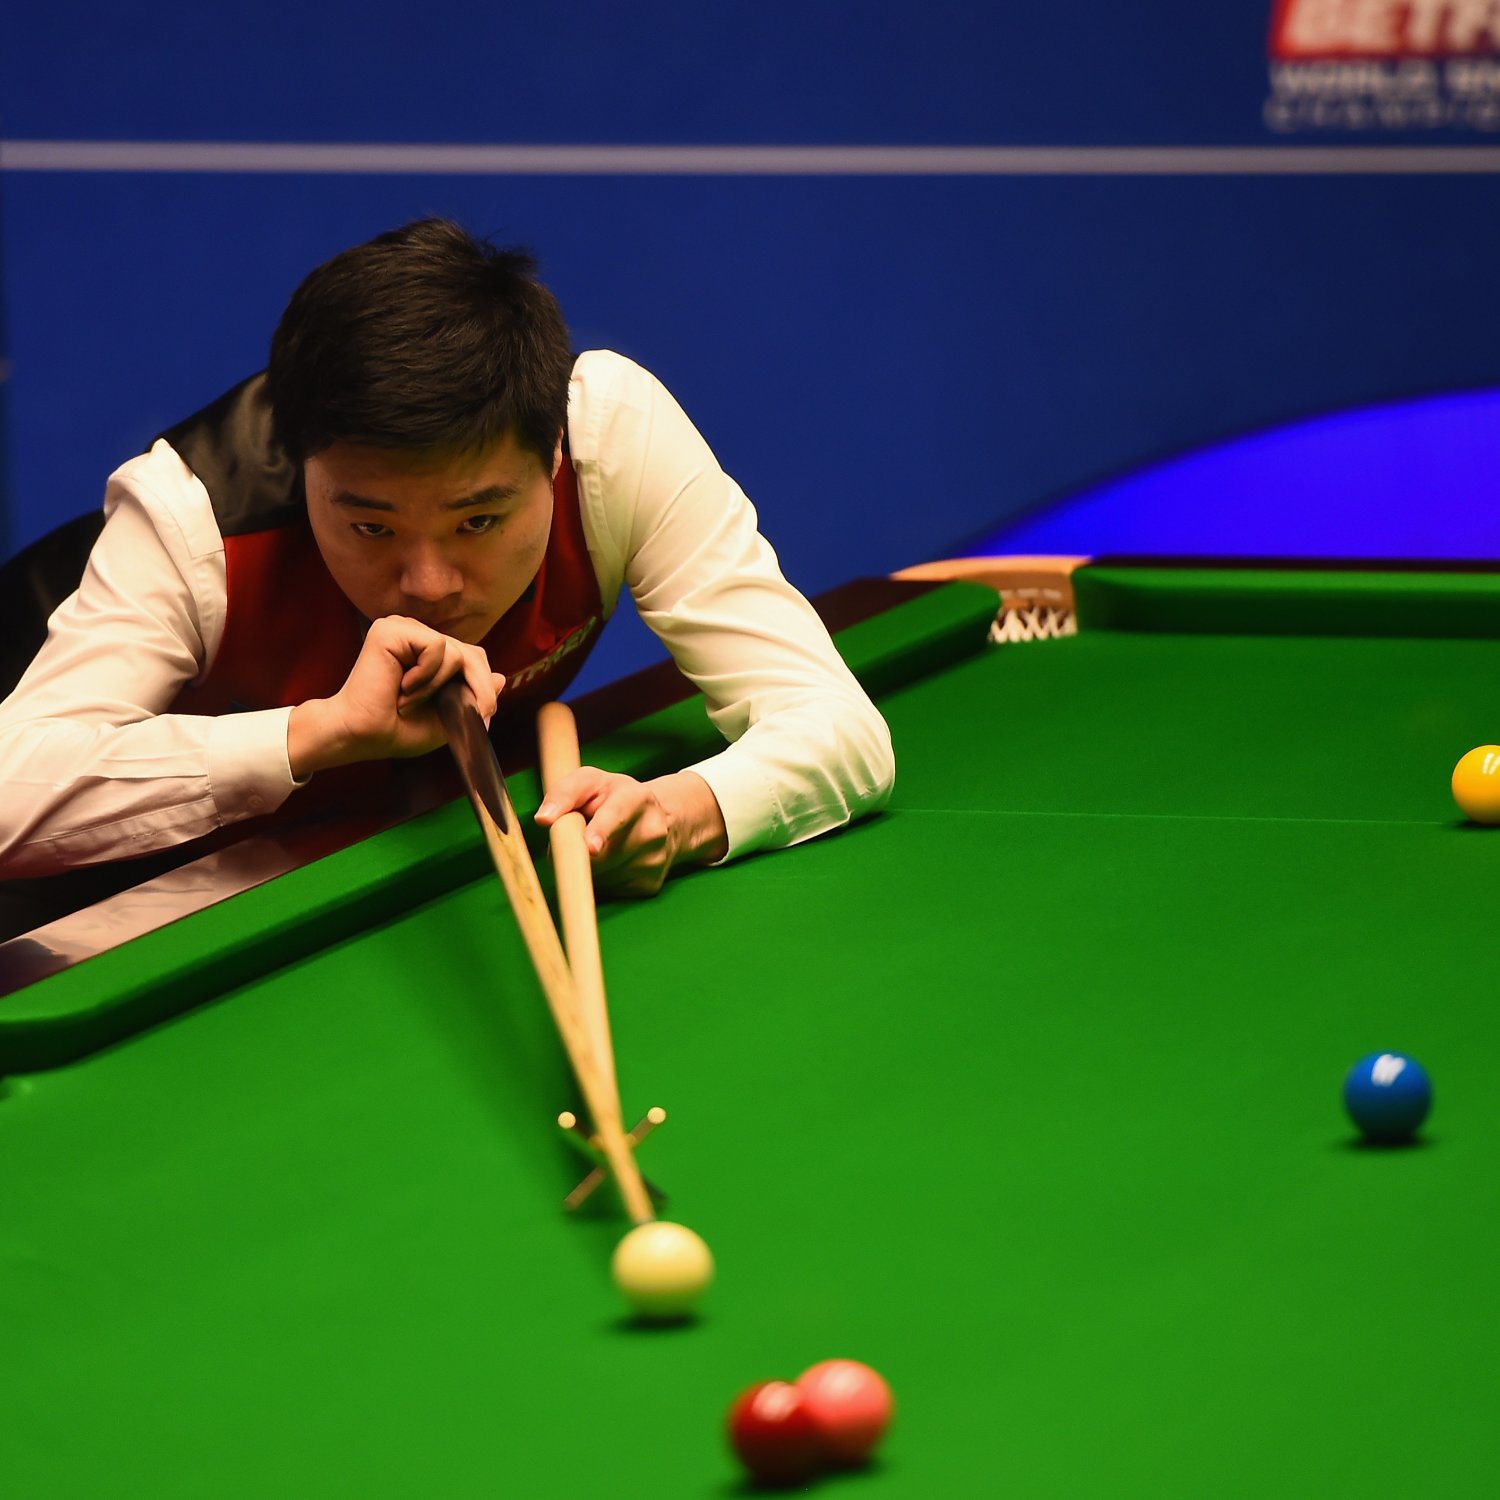 World Snooker Championship 2016 Results: Semi-Final Scores, Updated